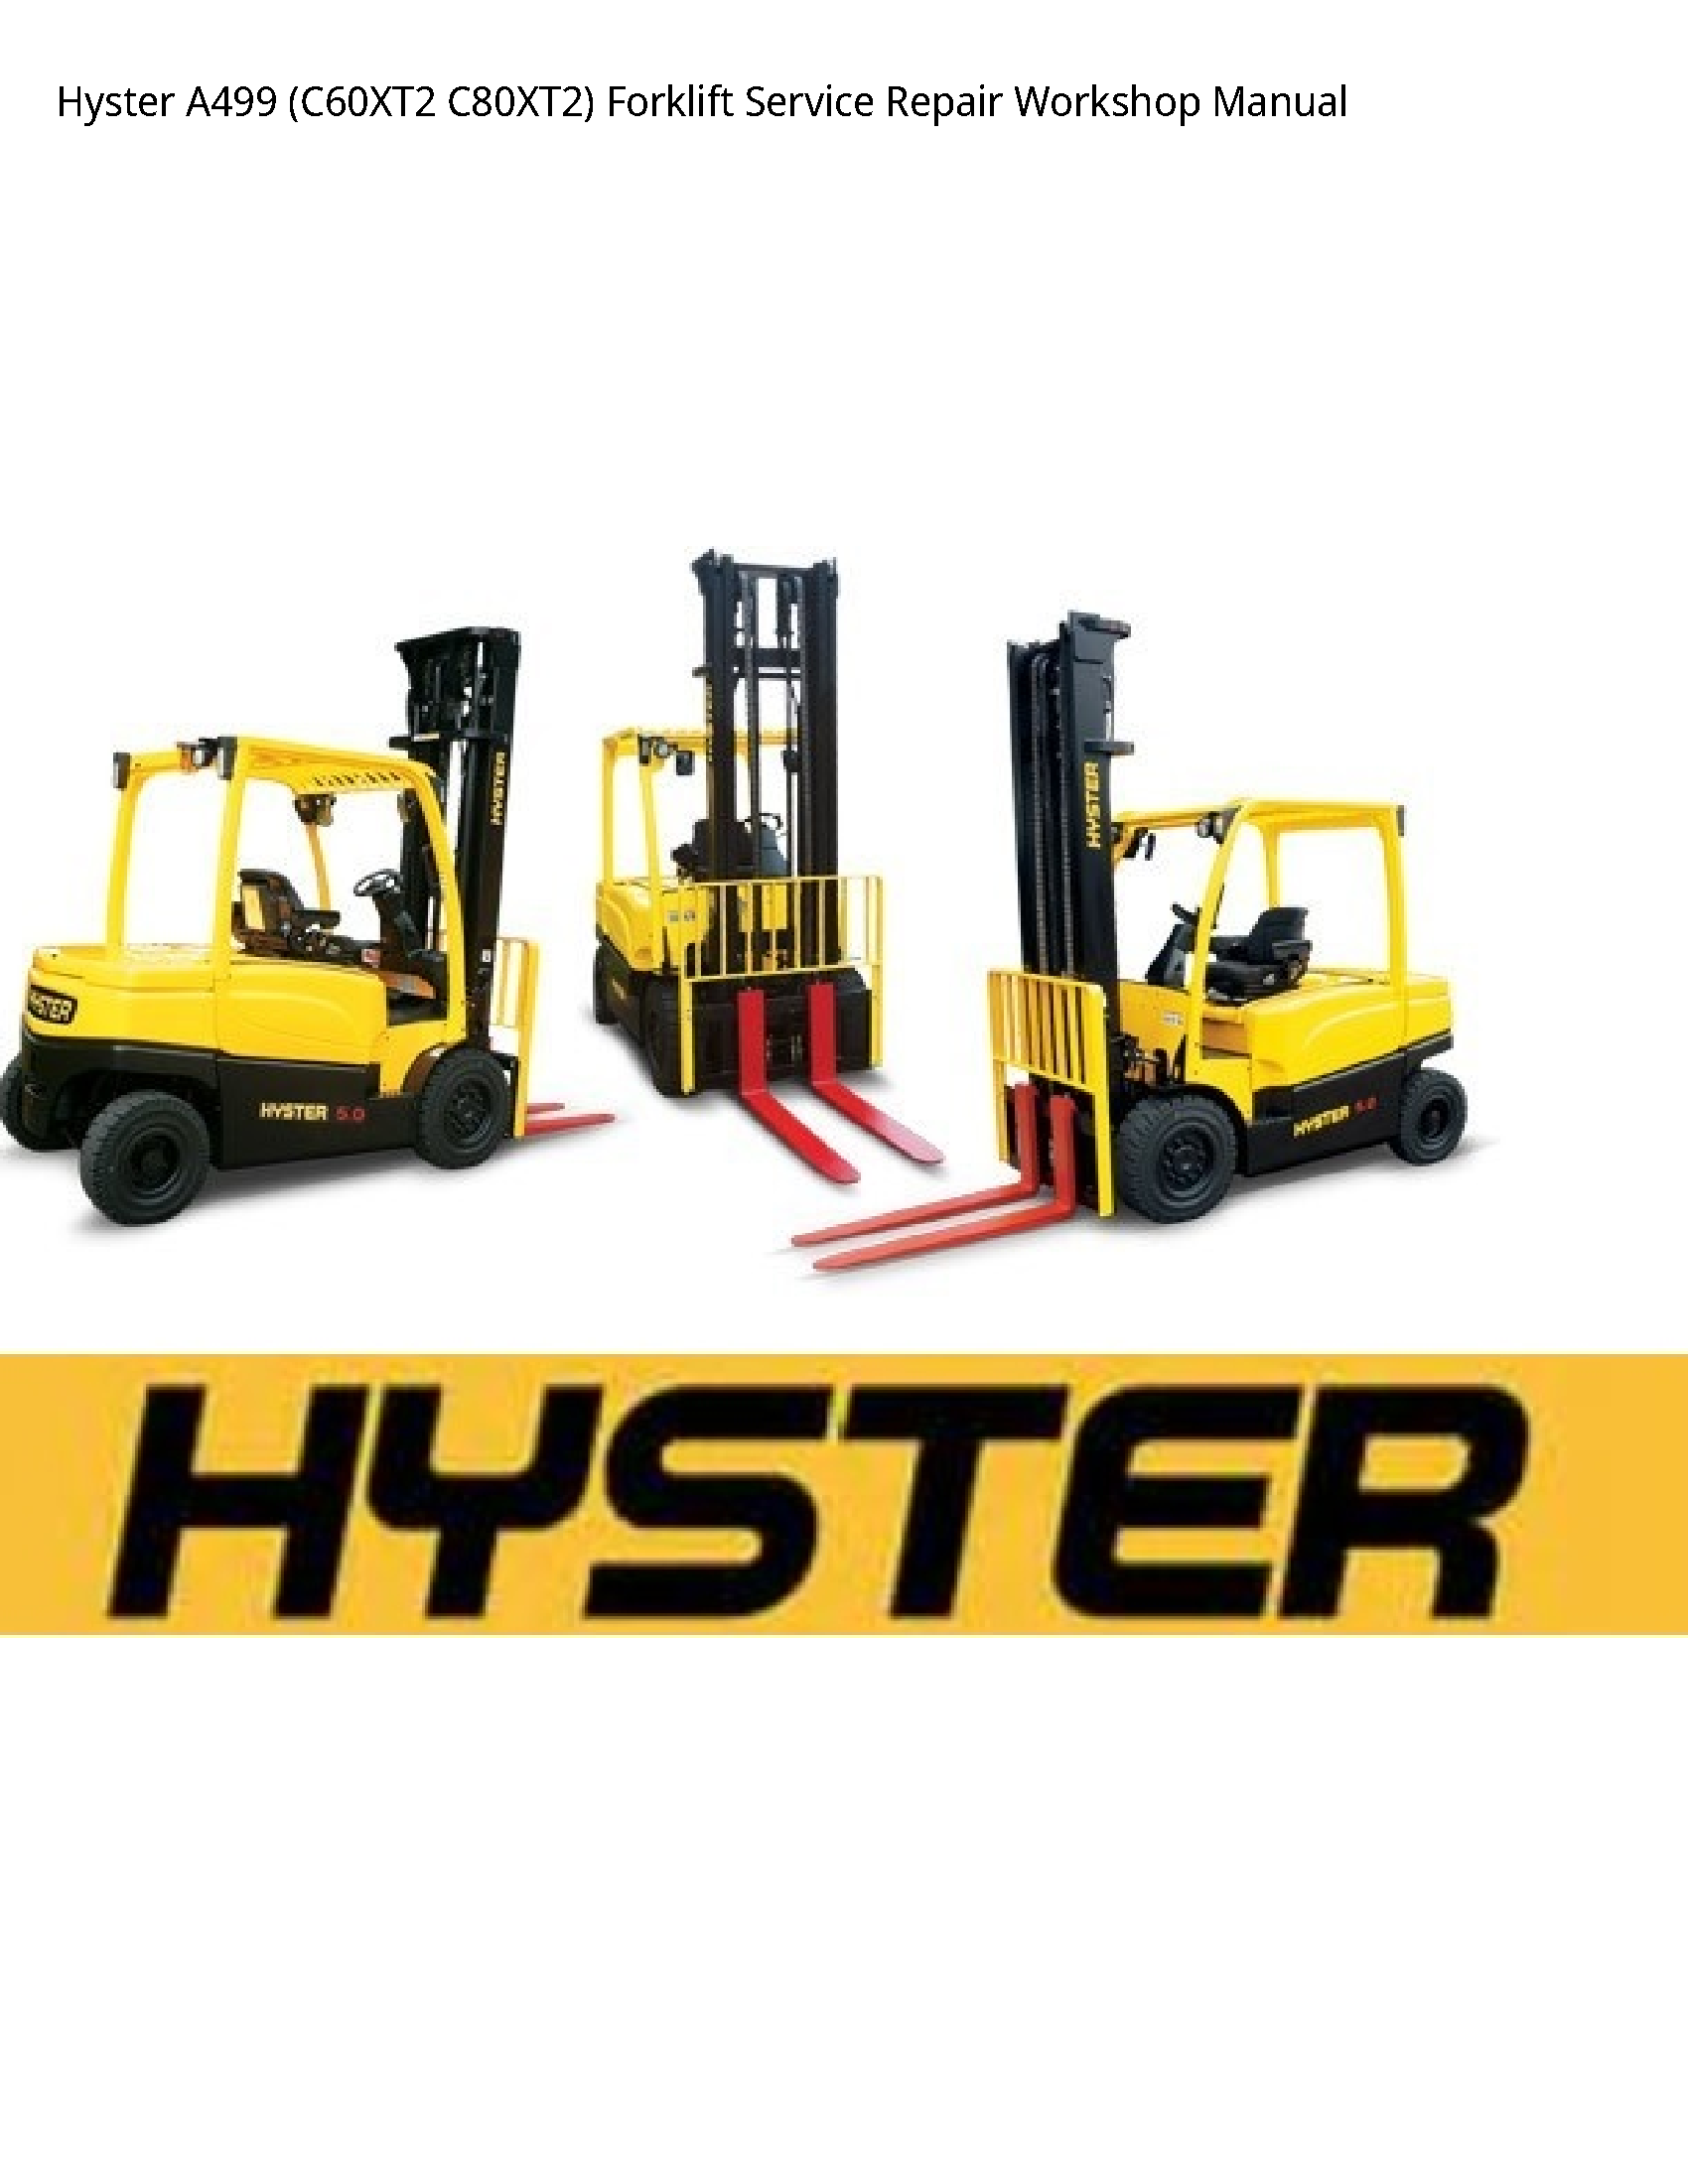 Hyster A499 Forklift manual